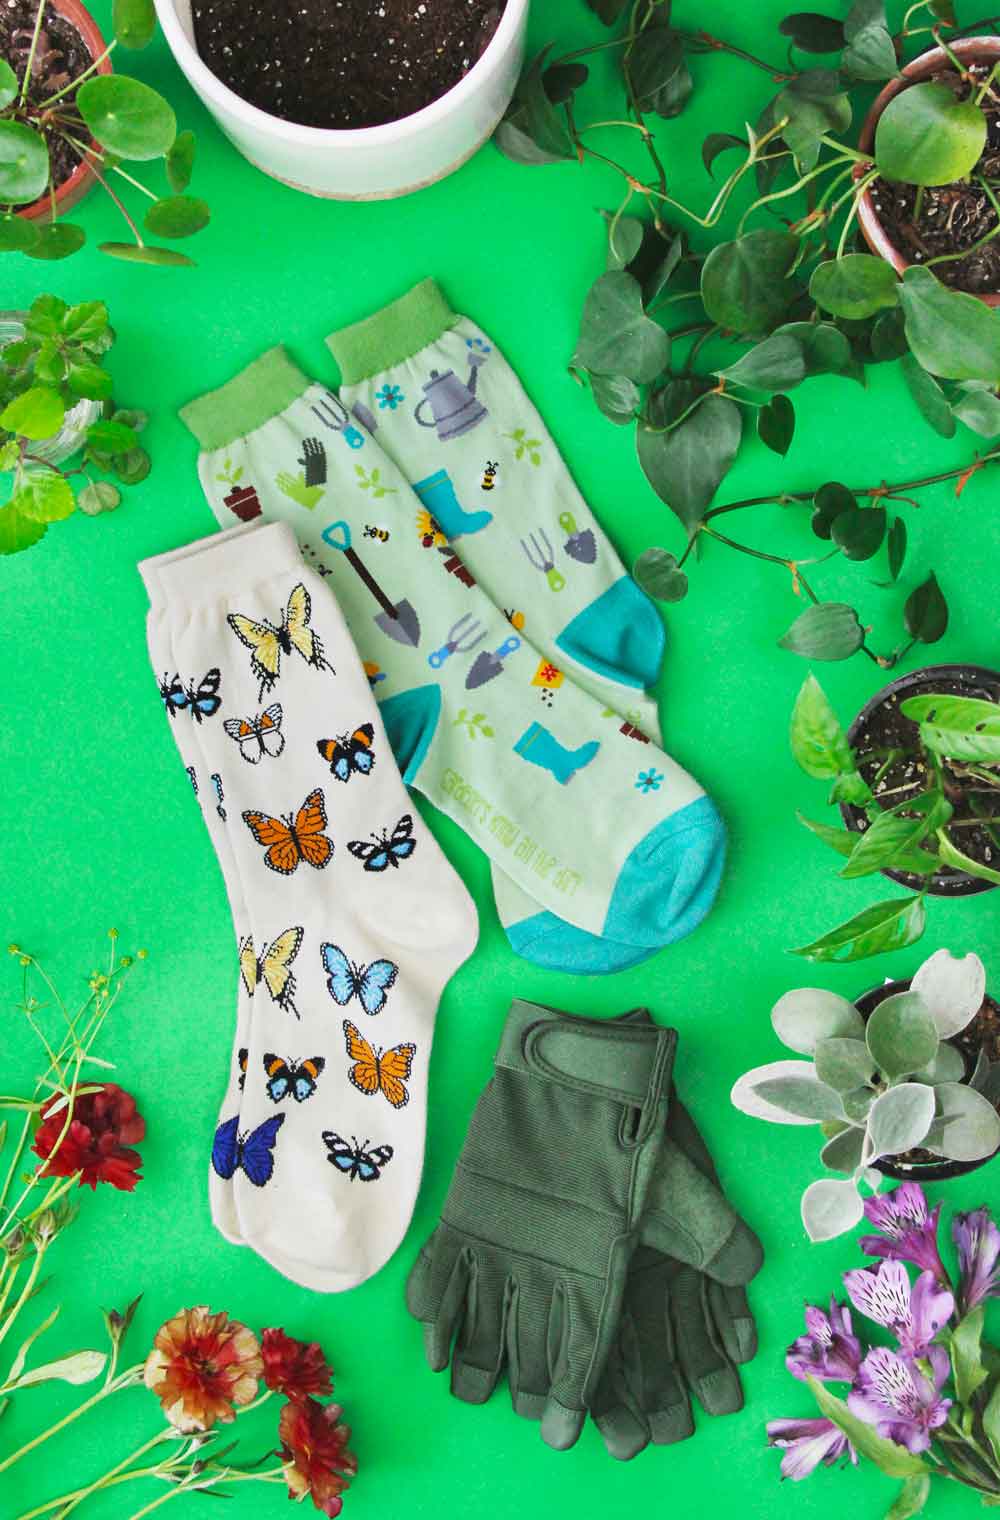 Butterflies and gardening socks laying on a green background surrounded by plants, flowers, and gardening gloves.